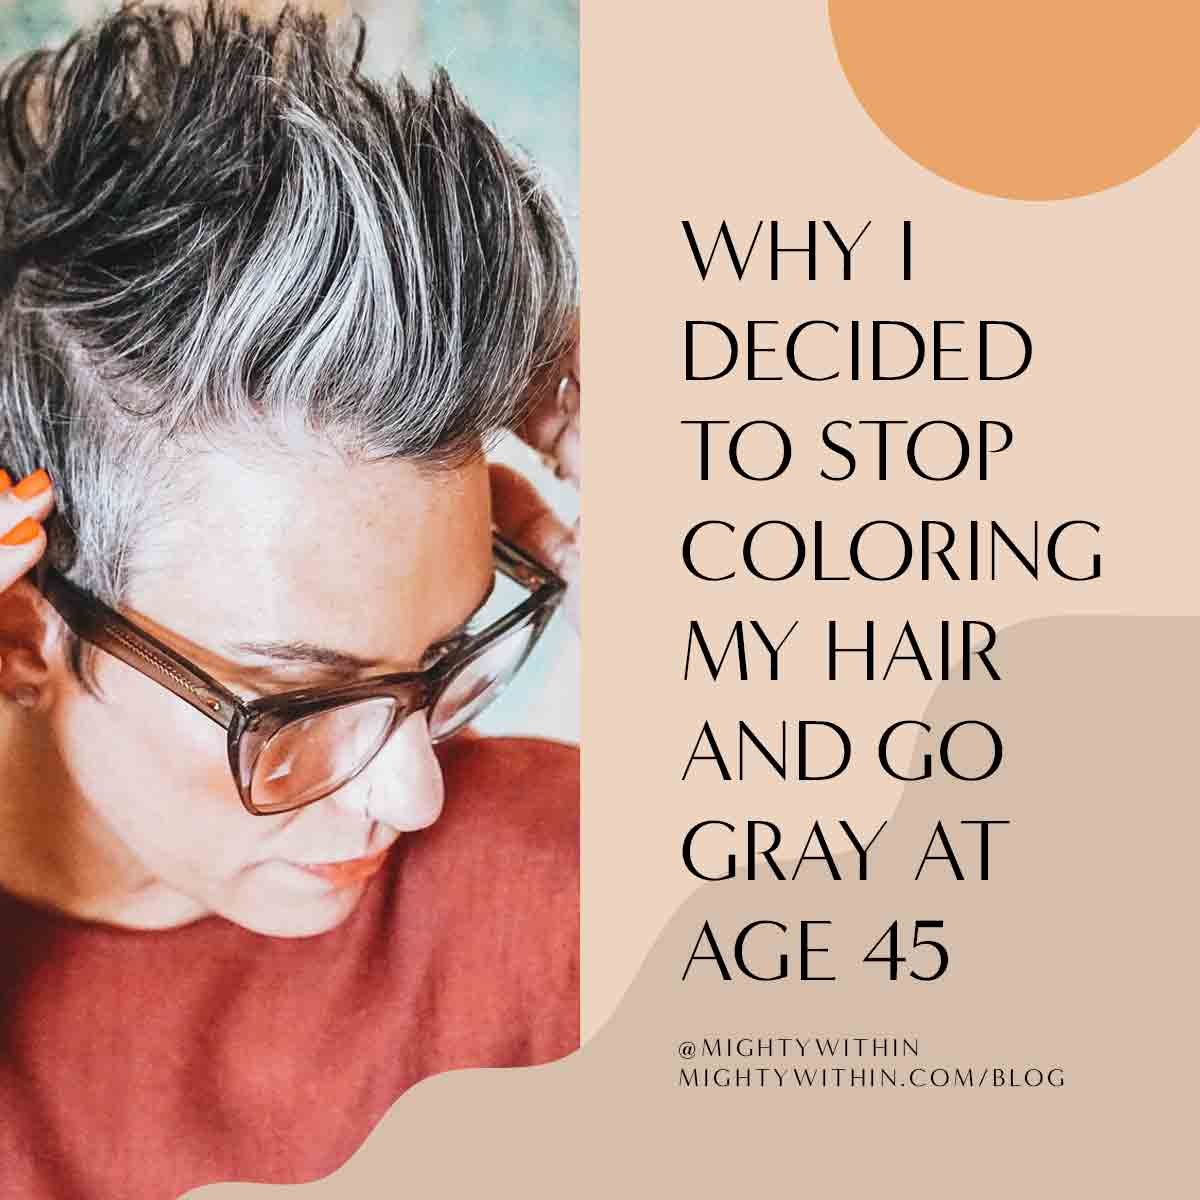 Why I decided to stop coloring my hair and go gray at age 45—Mighty Within